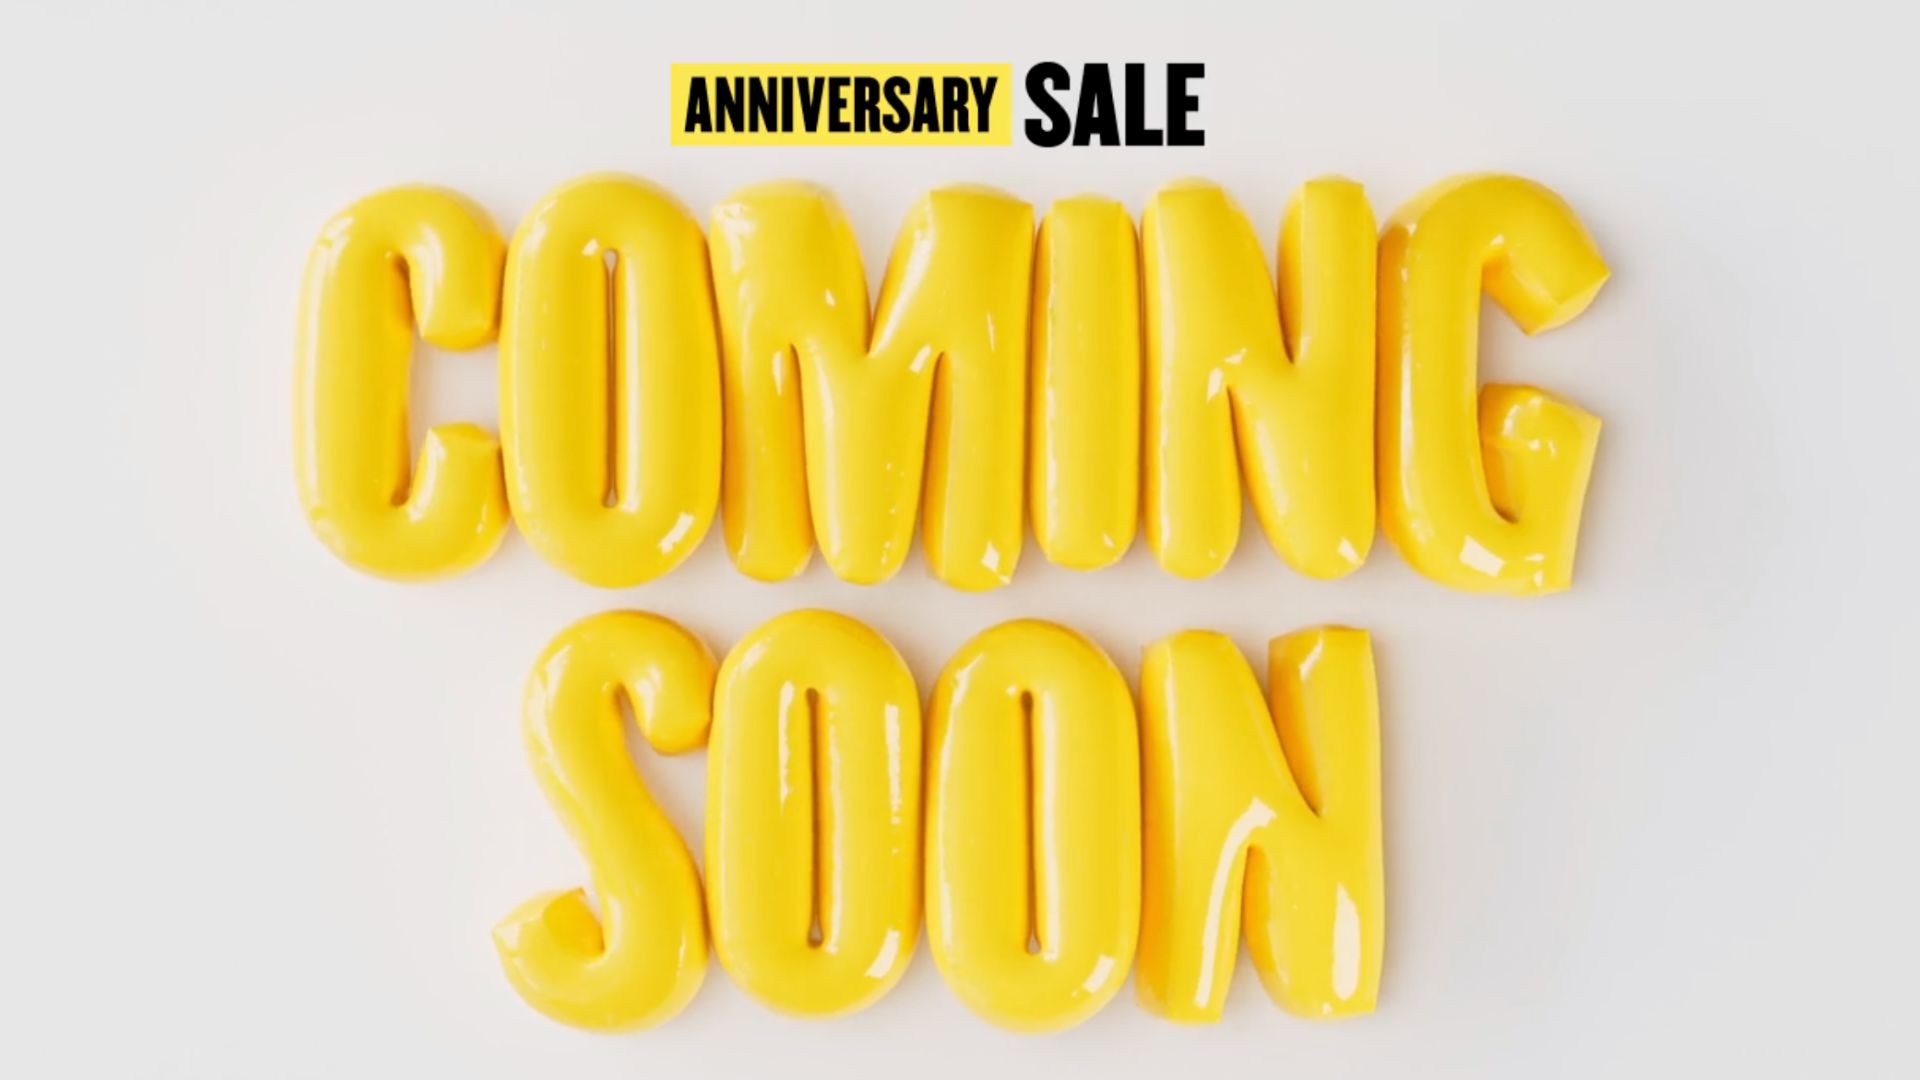 The Nordstrom Anniversary Sale